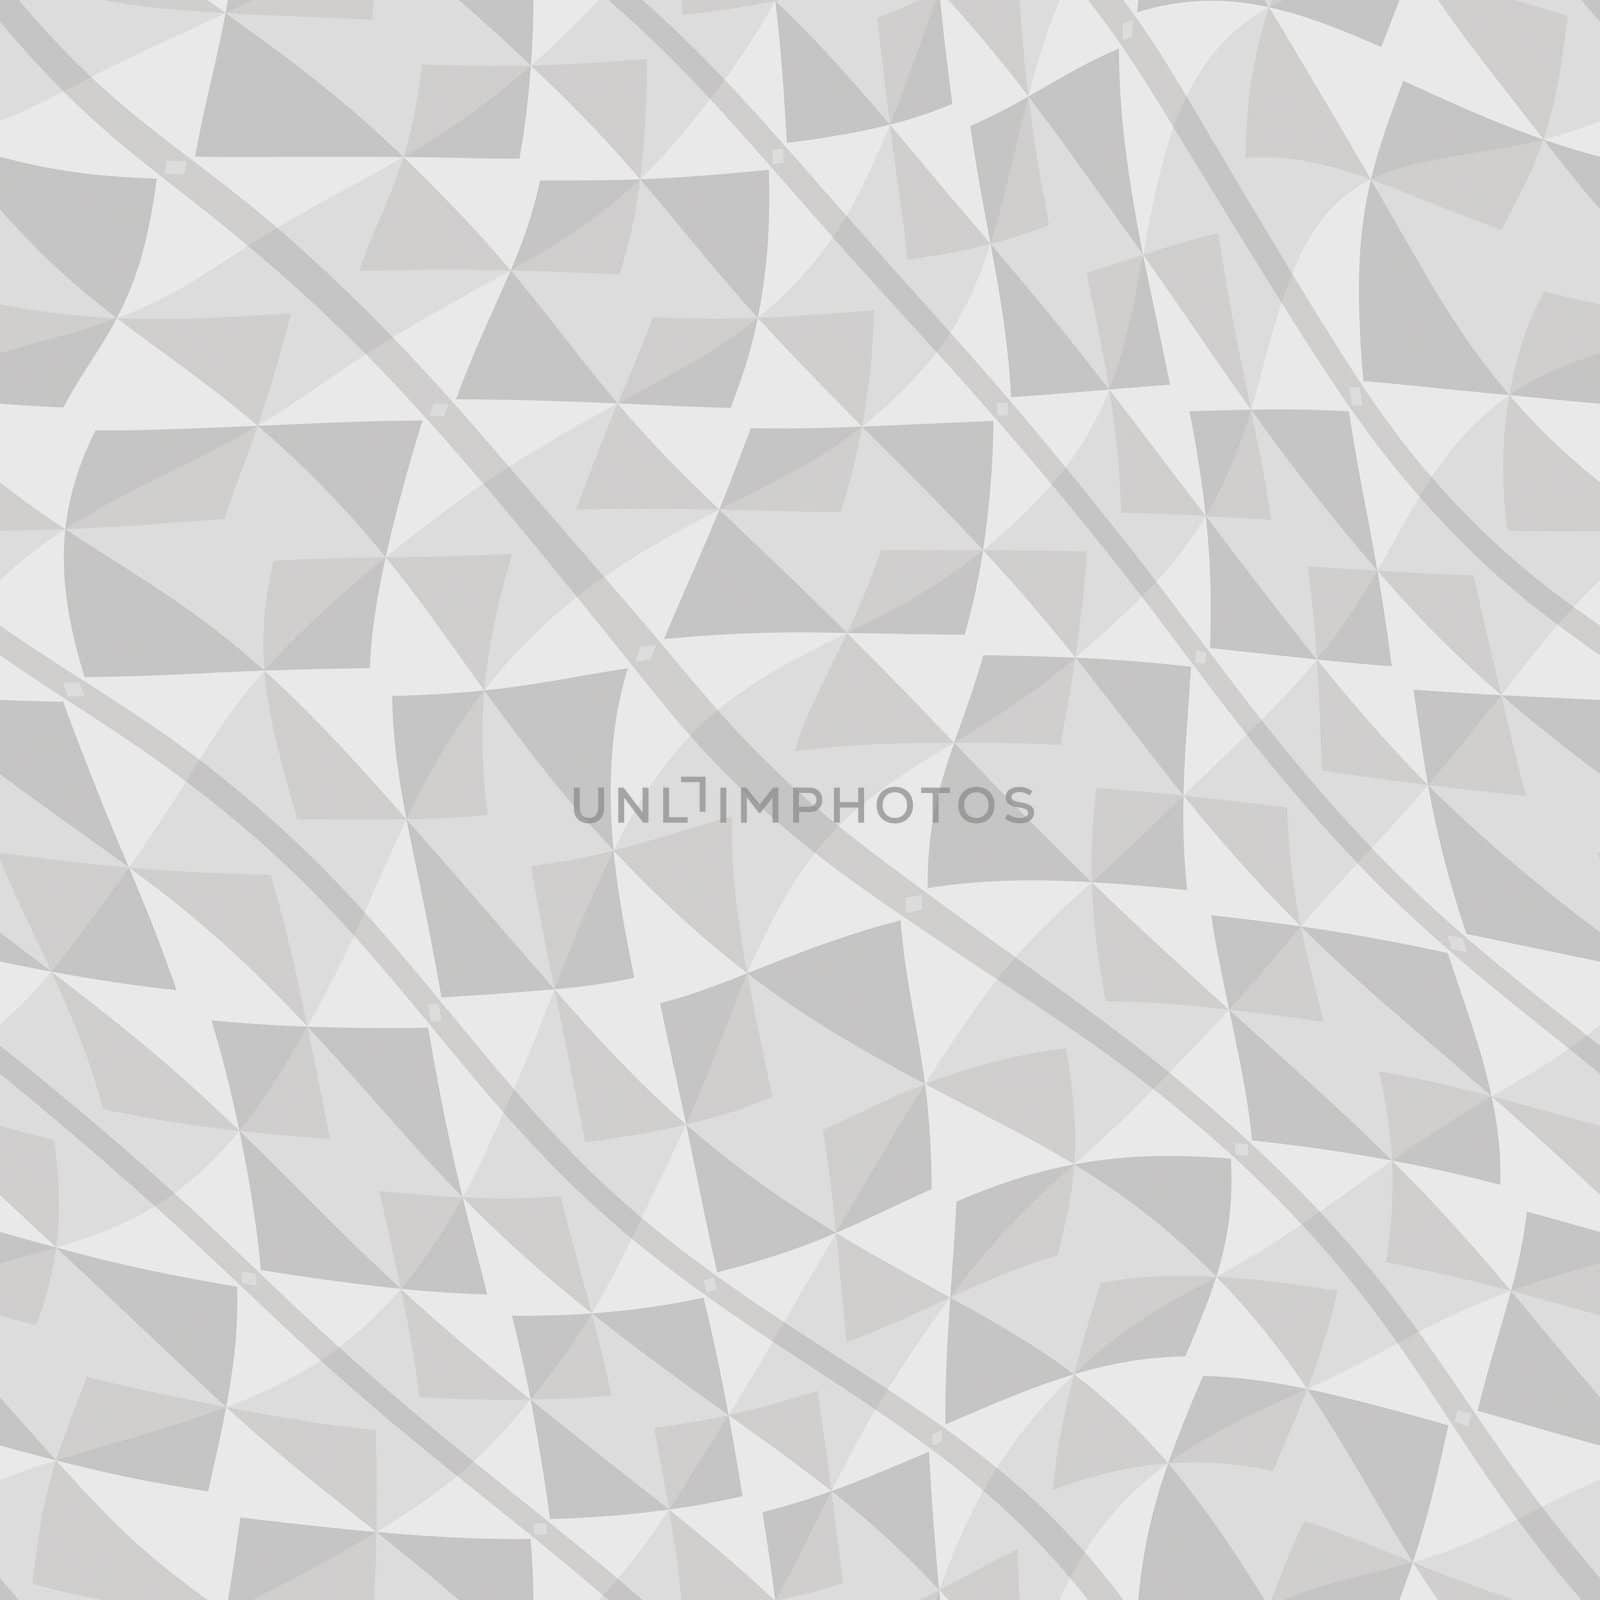 seamless textures of abstracted lines and squares in grey tones